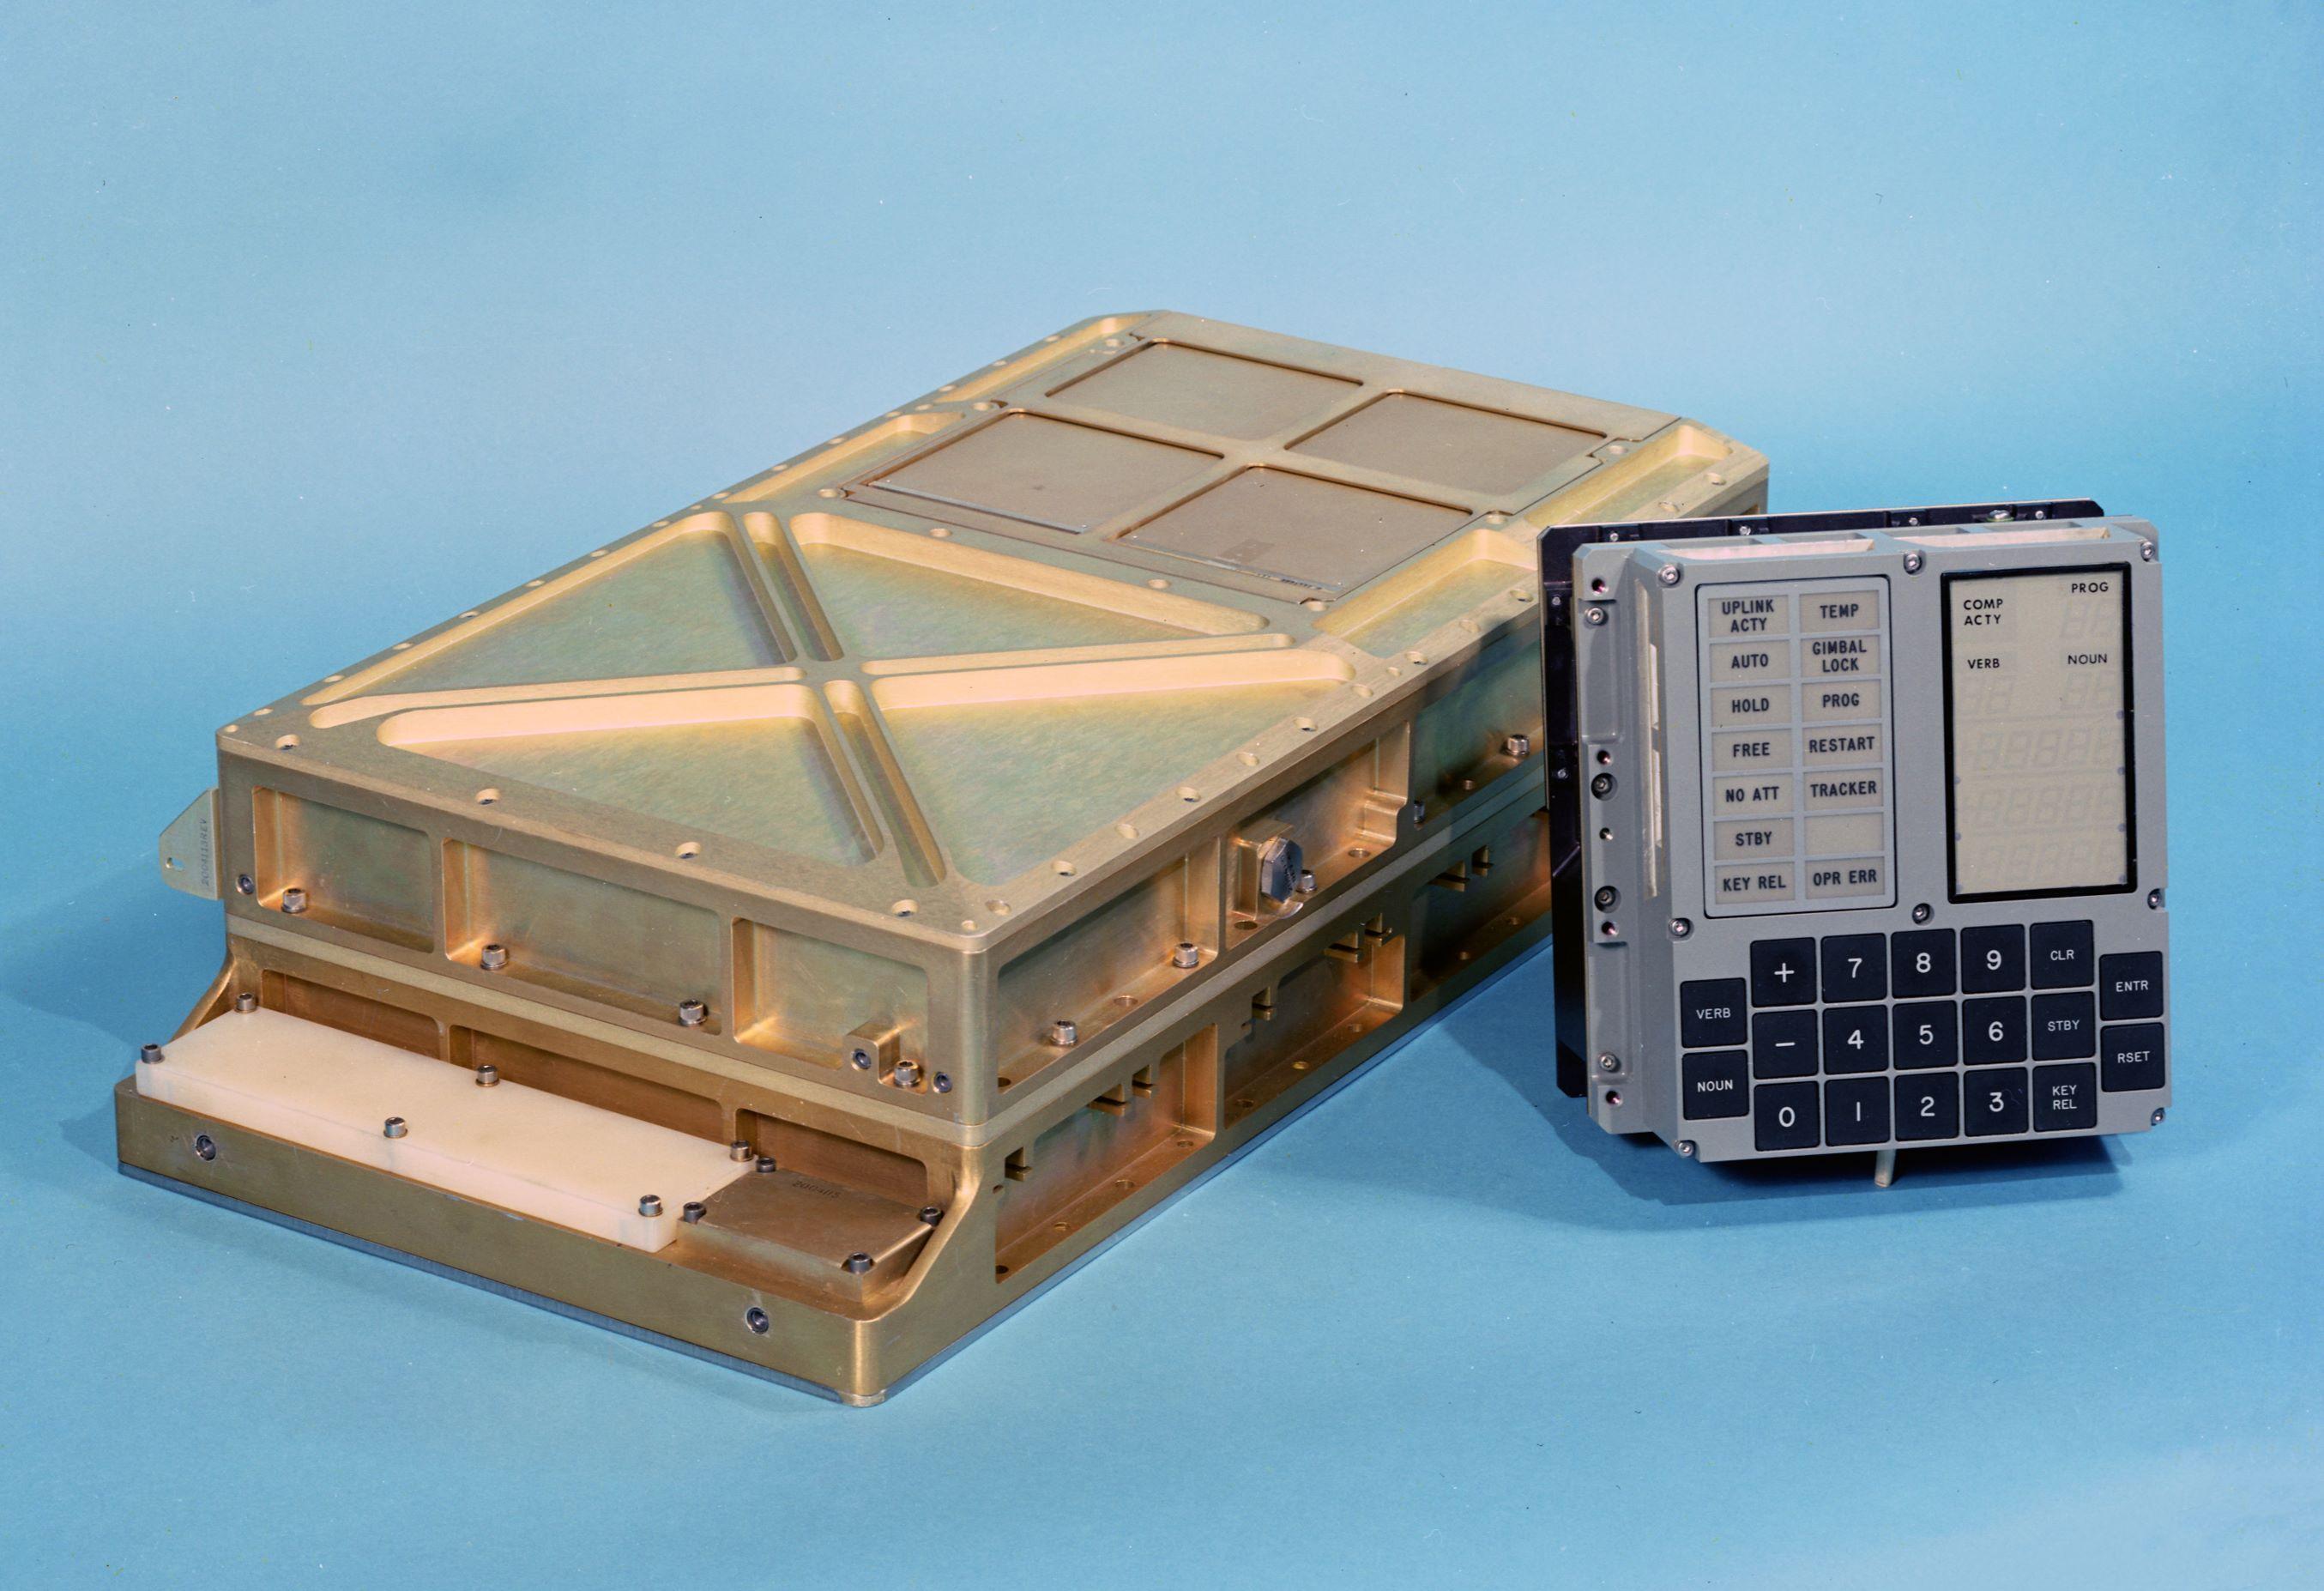 The Apollo Guidance Computer and the DSKEY input module